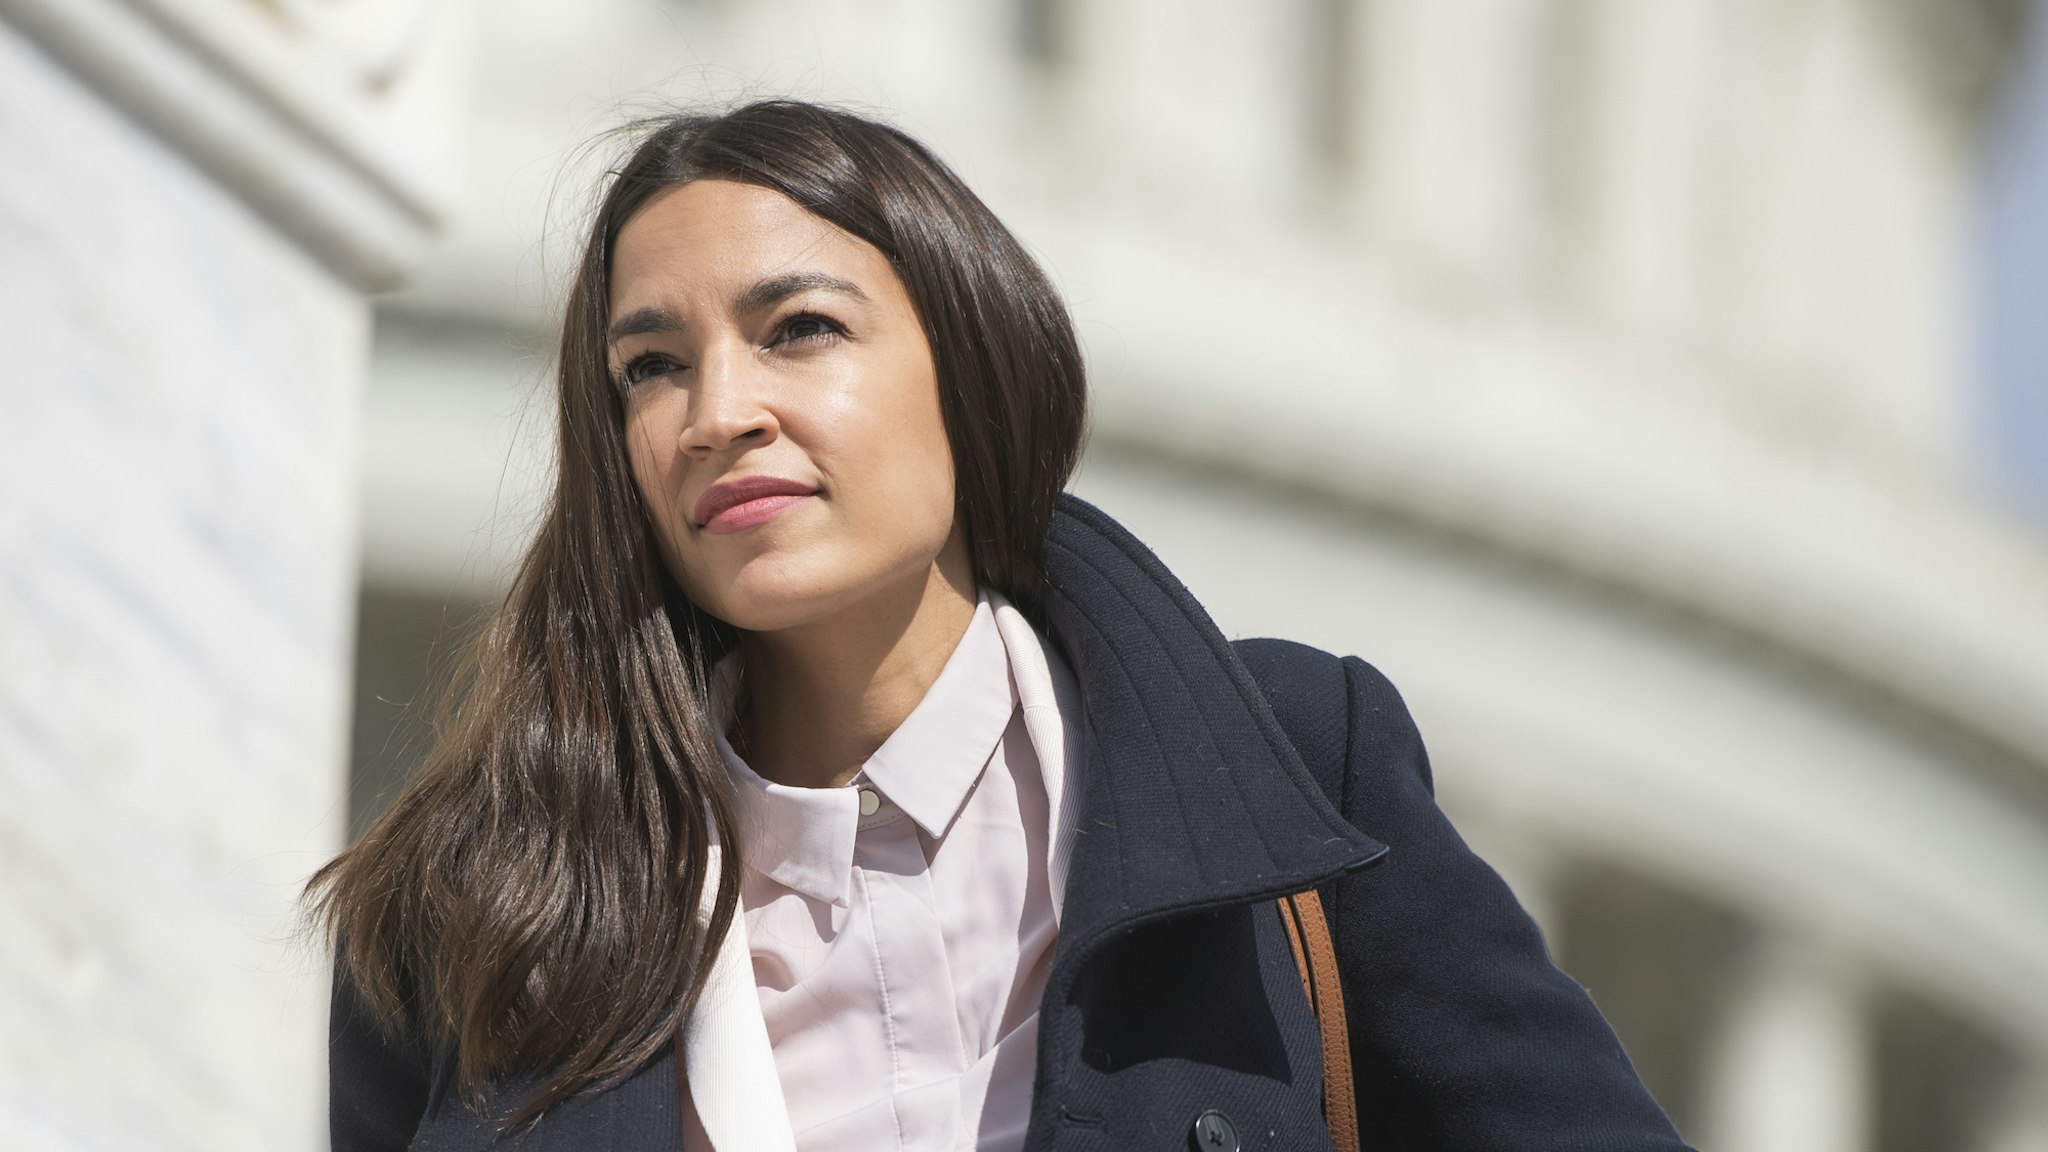 Rep. Alexandria Ocasio-Cortez, D-N.Y., is seen on the House steps of the Capitol before the House passed a $2 trillion coronavirus aid package by voice vote on Friday, March 27, 2020. (Photo By Tom Williams/CQ Roll Call)